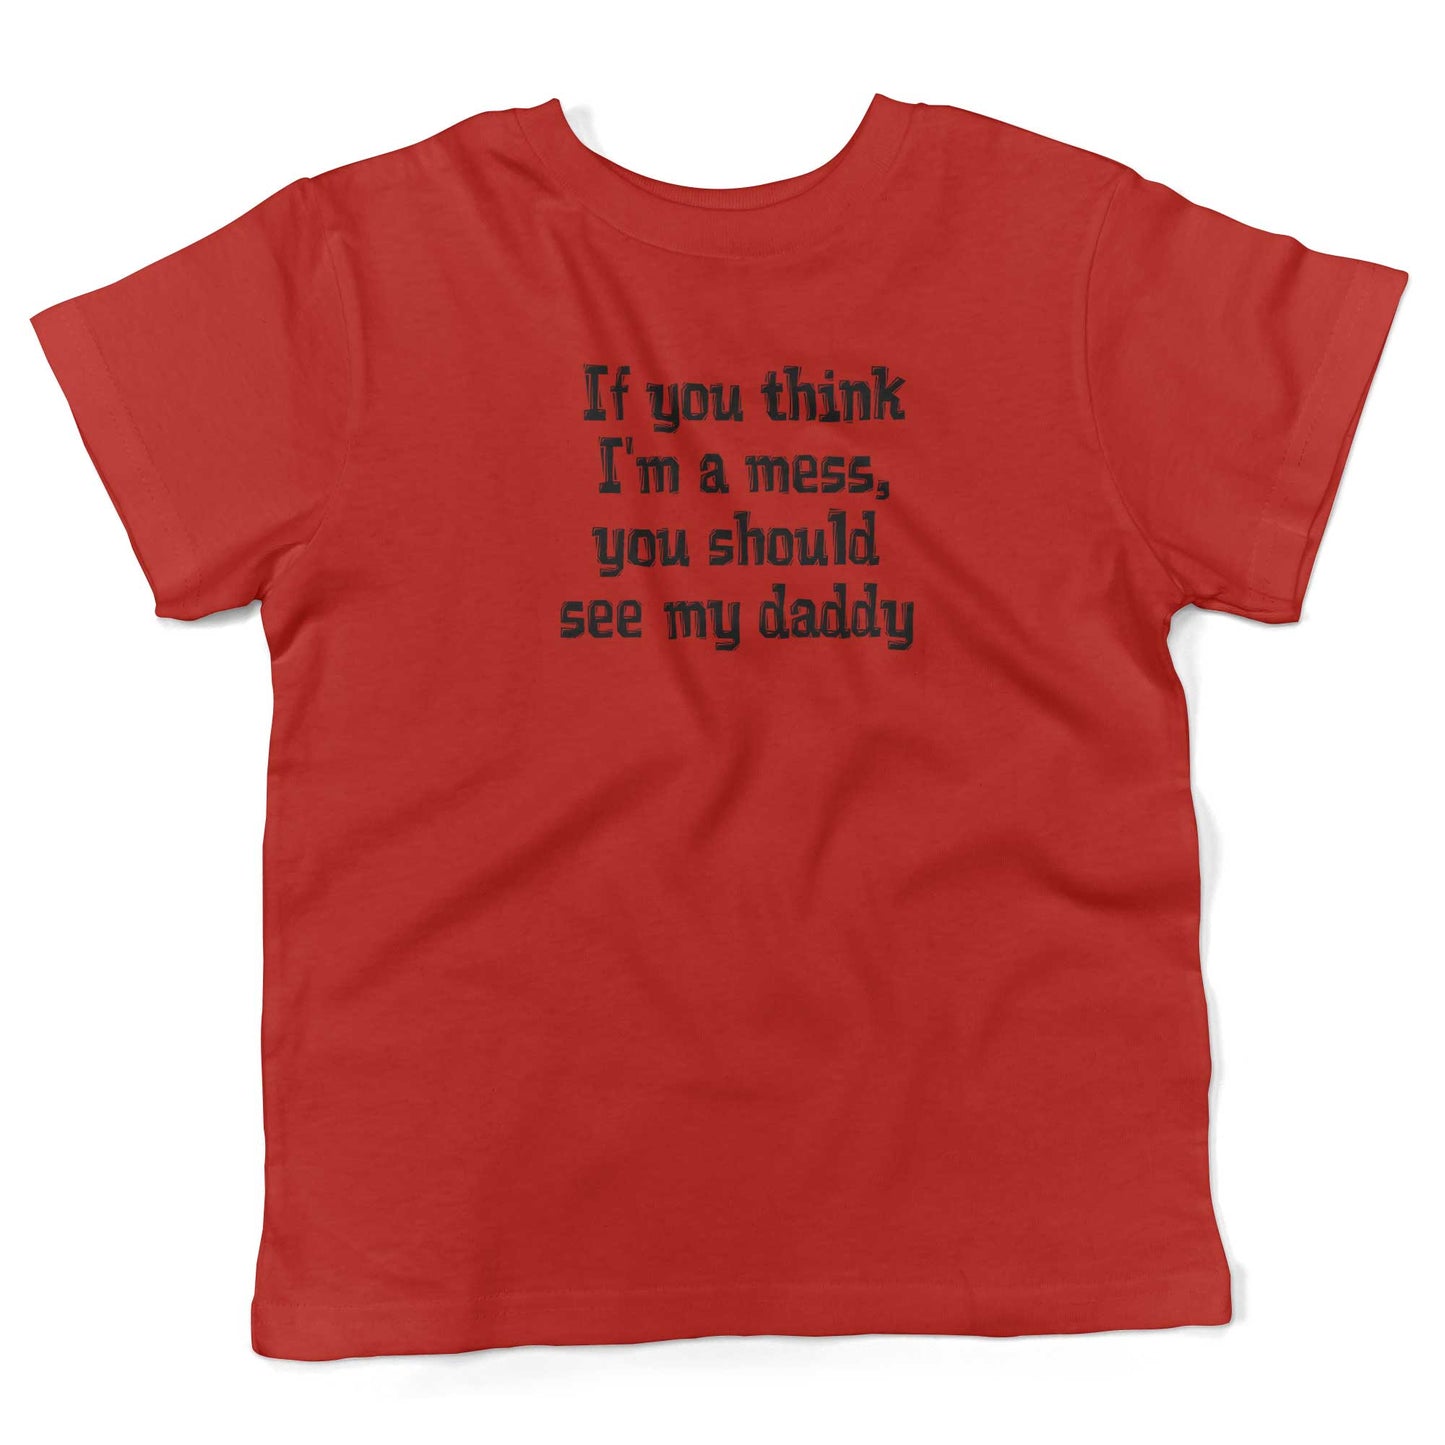 If You Think I'm A Mess, You Should See My Daddy Toddler Shirt-Red-2T